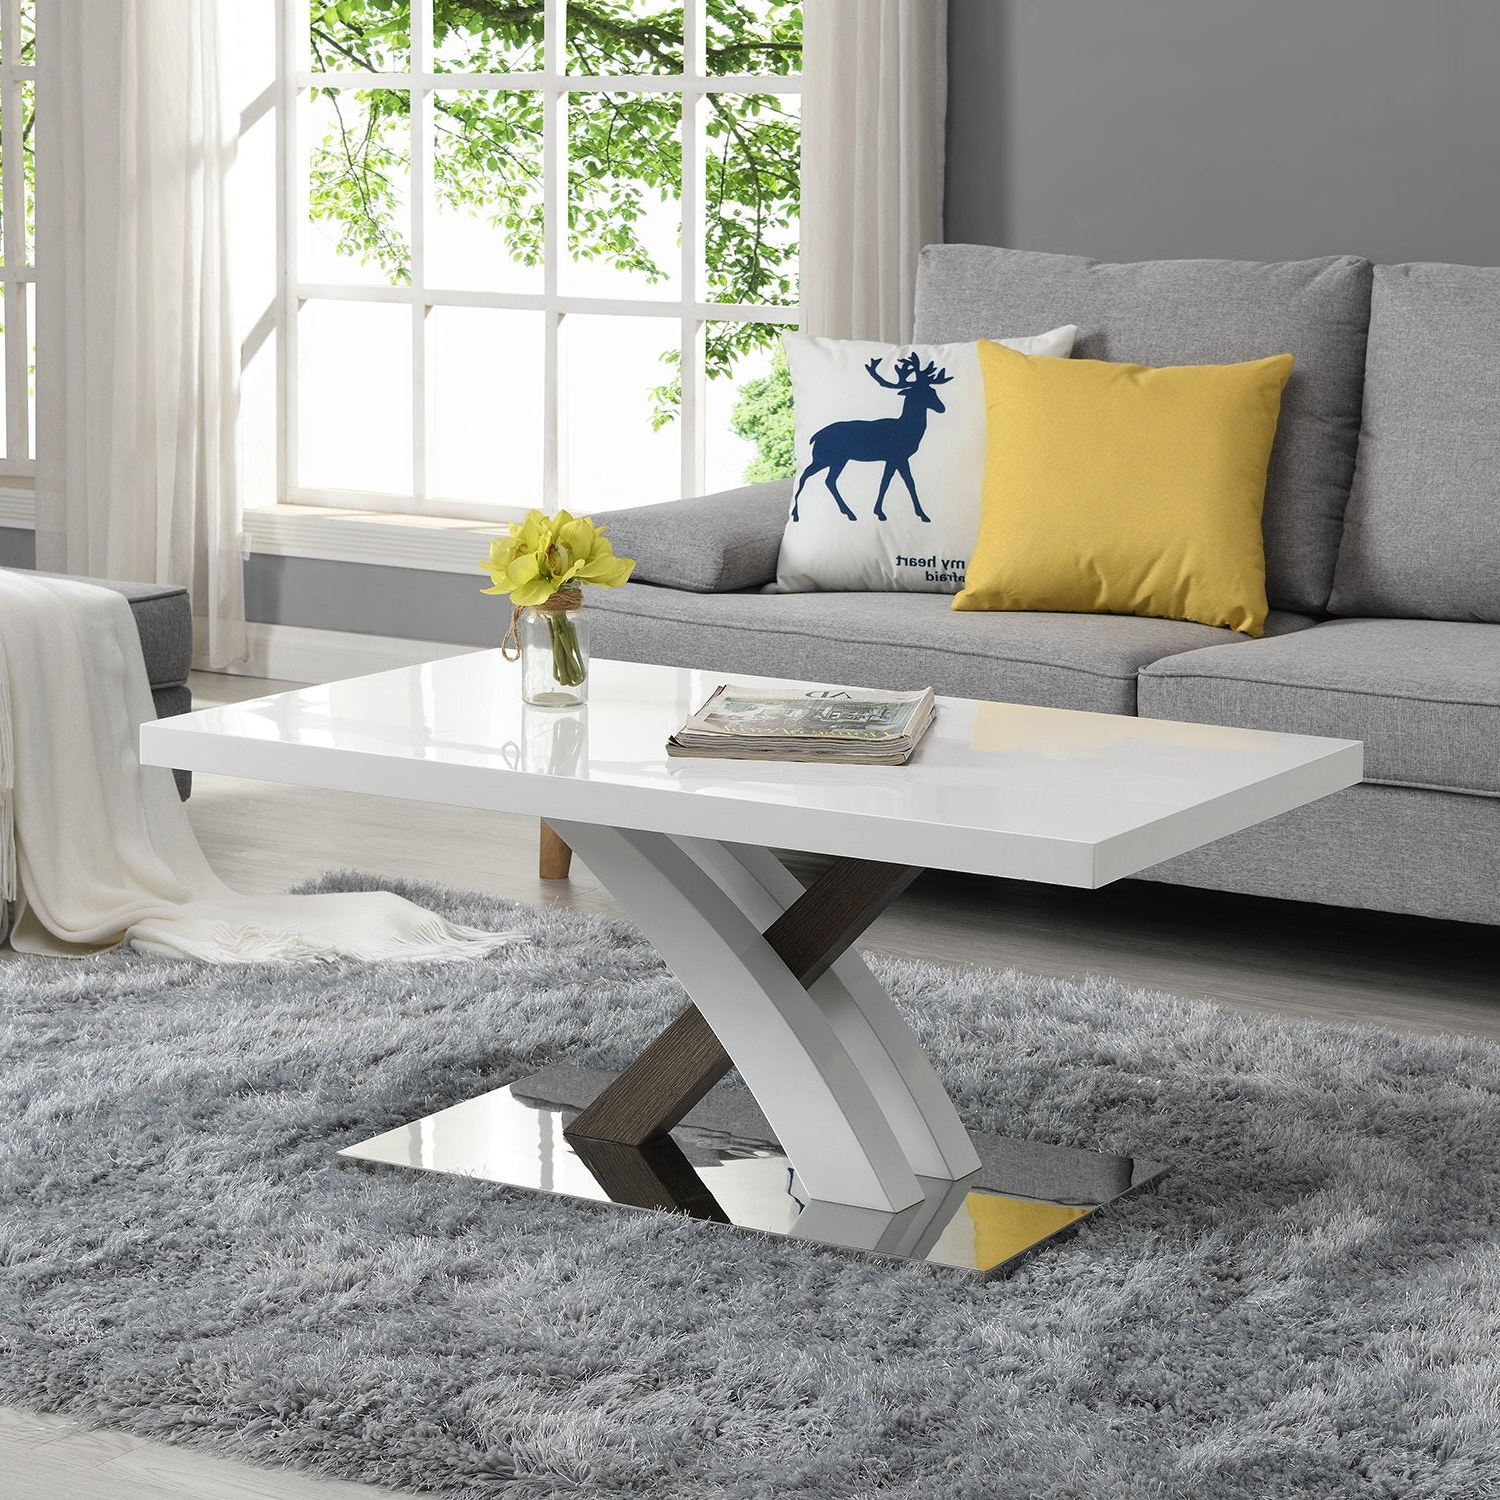 Basel High Gloss White Coffee Table With Stainless Steel Base 1 Pertaining To White T Base Seminar Coffee Tables (Gallery 3 of 20)